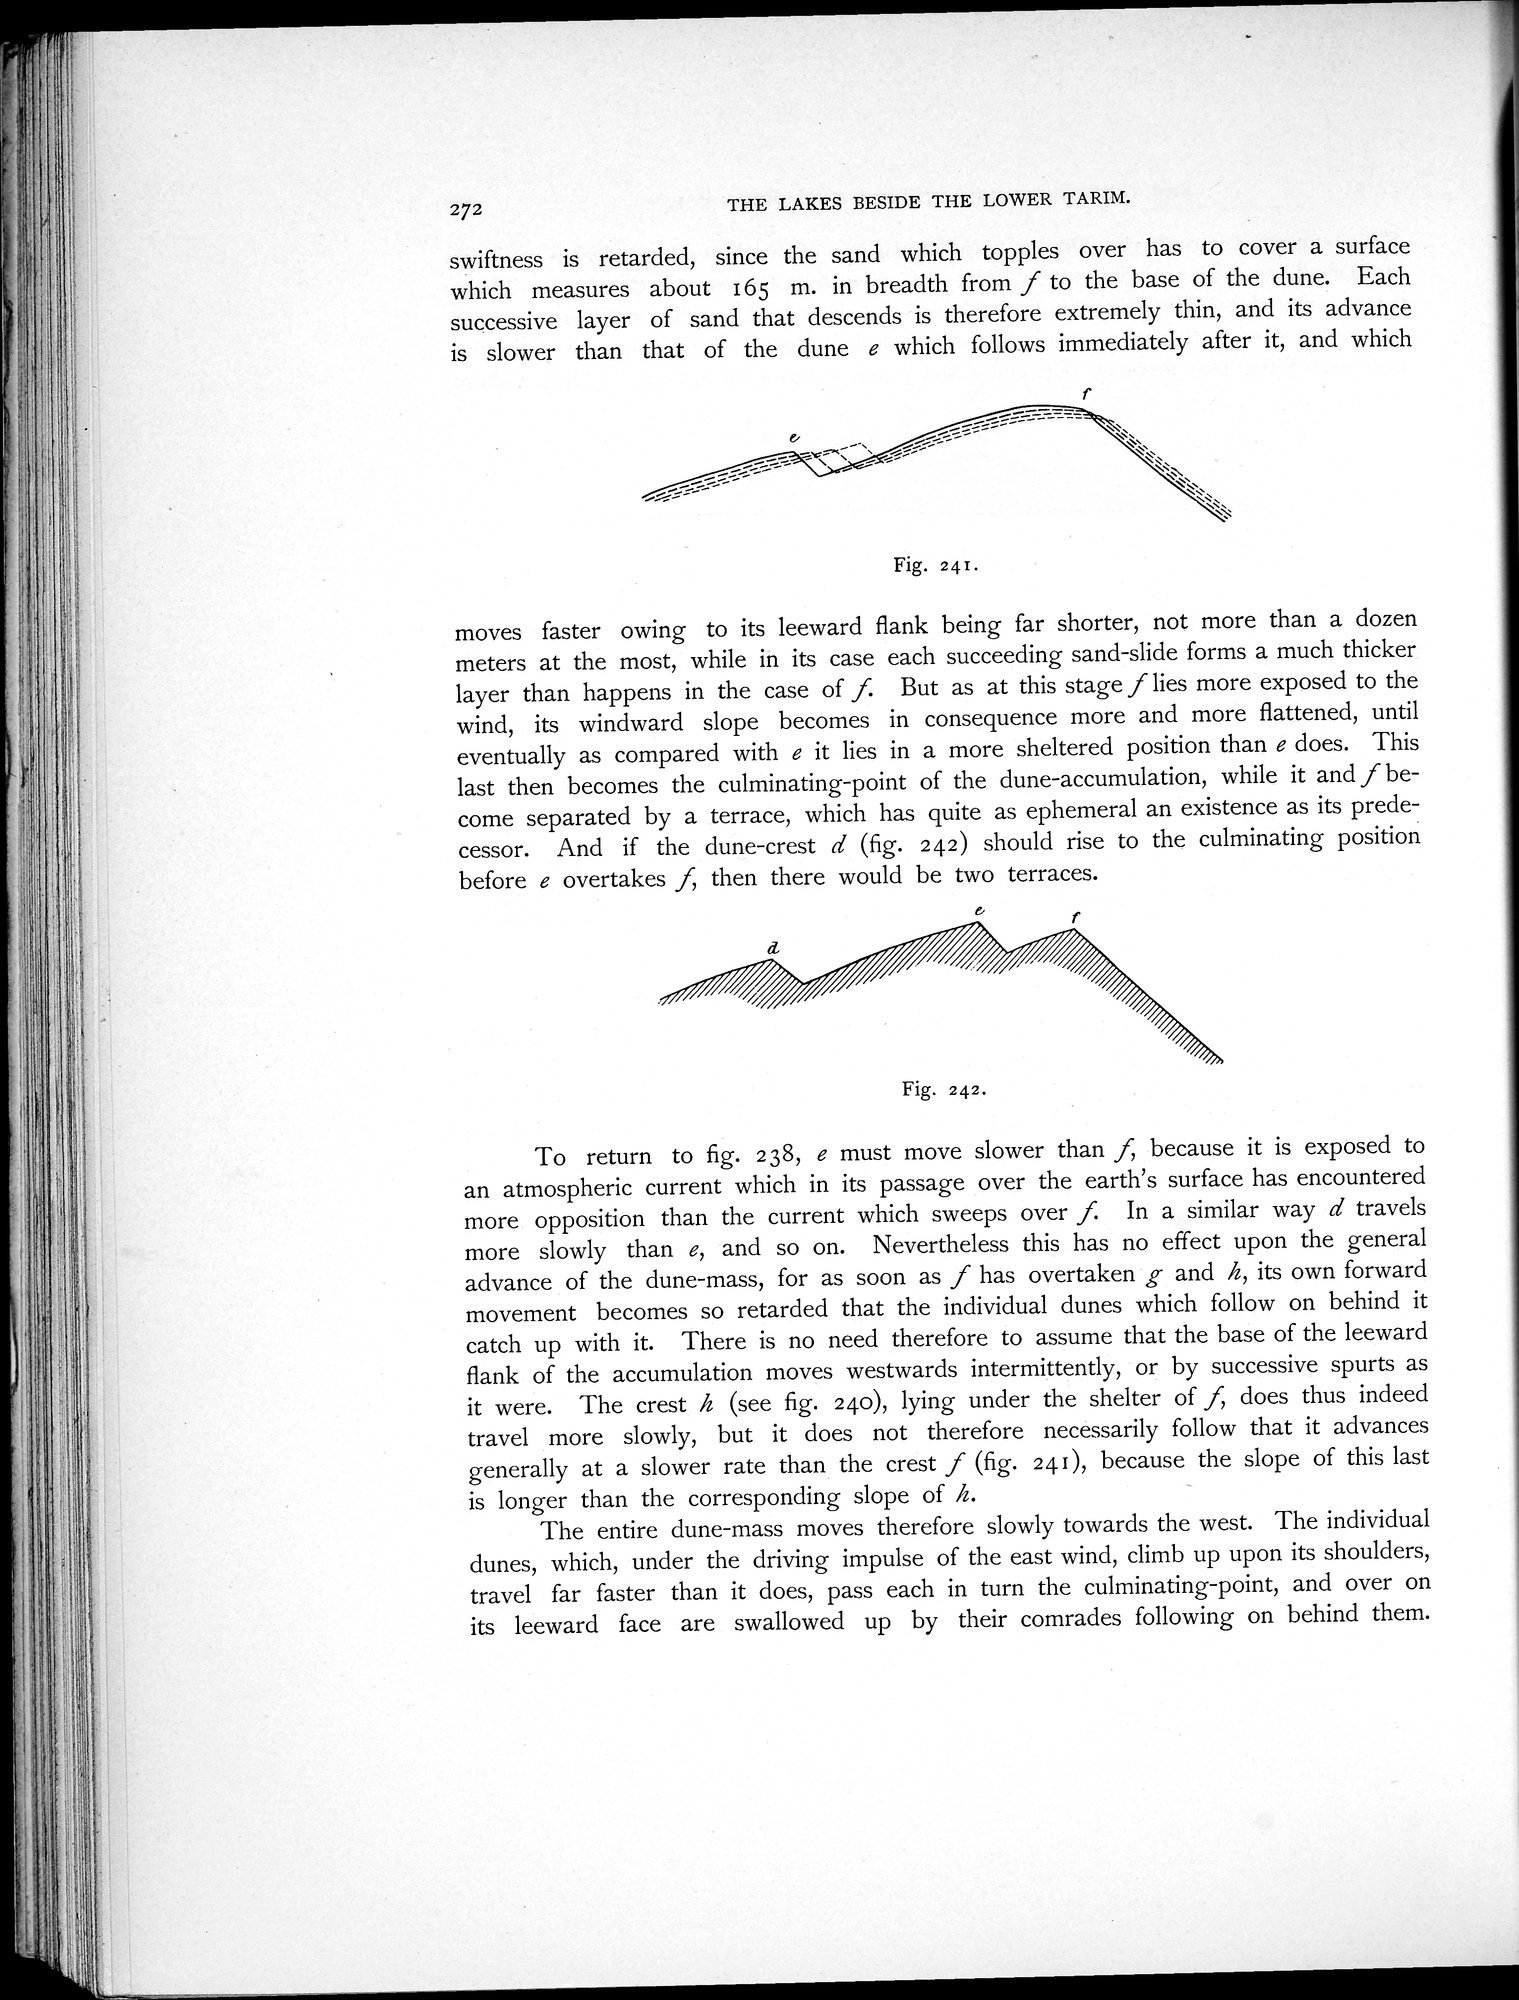 Scientific Results of a Journey in Central Asia, 1899-1902 : vol.1 / 380 ページ（白黒高解像度画像）